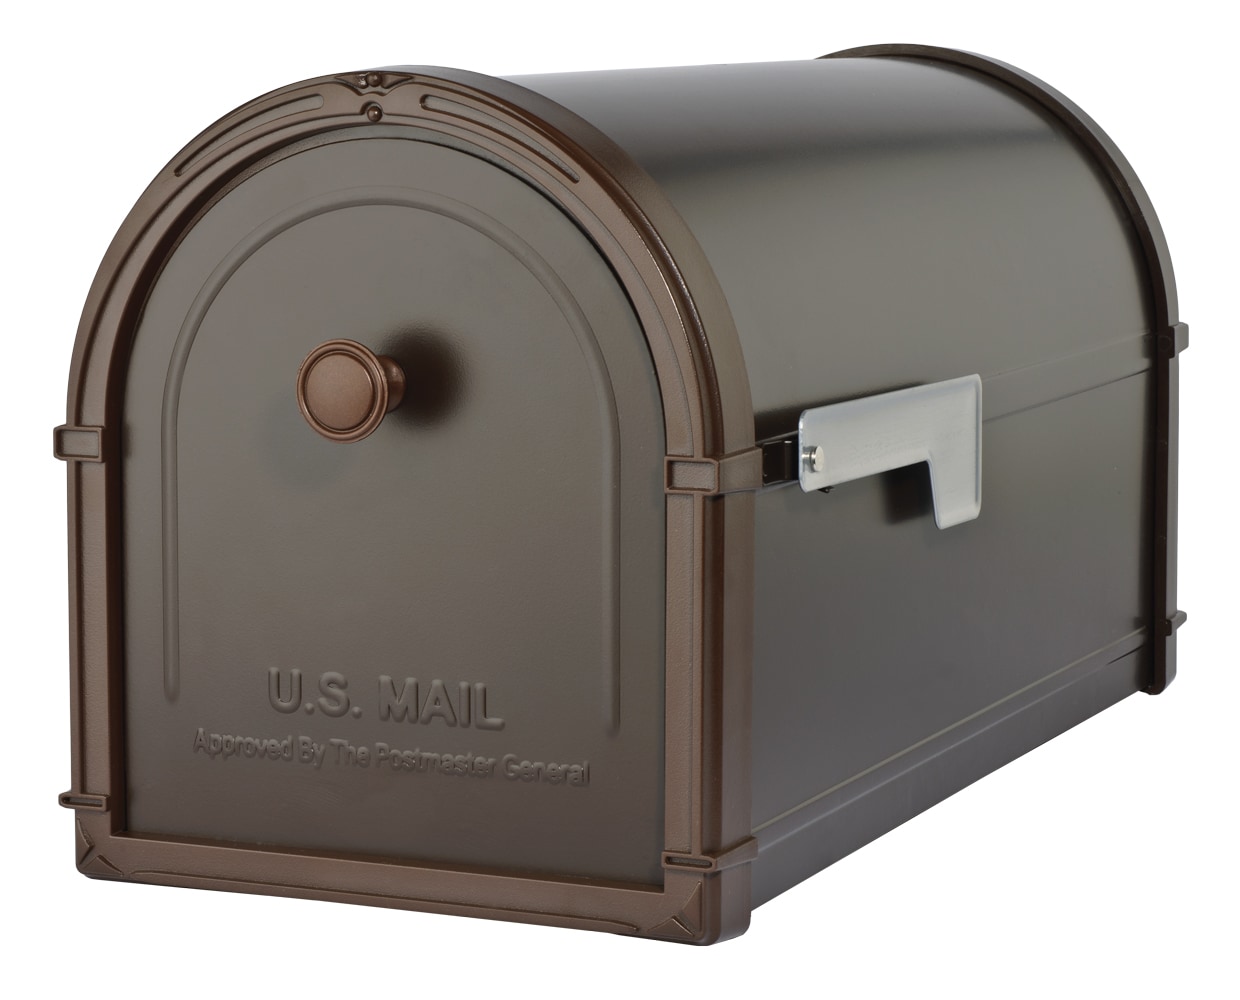 Bronze Mailbox and Post Combo Kit Heavy-Duty Weather/Vandal Resistant W/ Knob